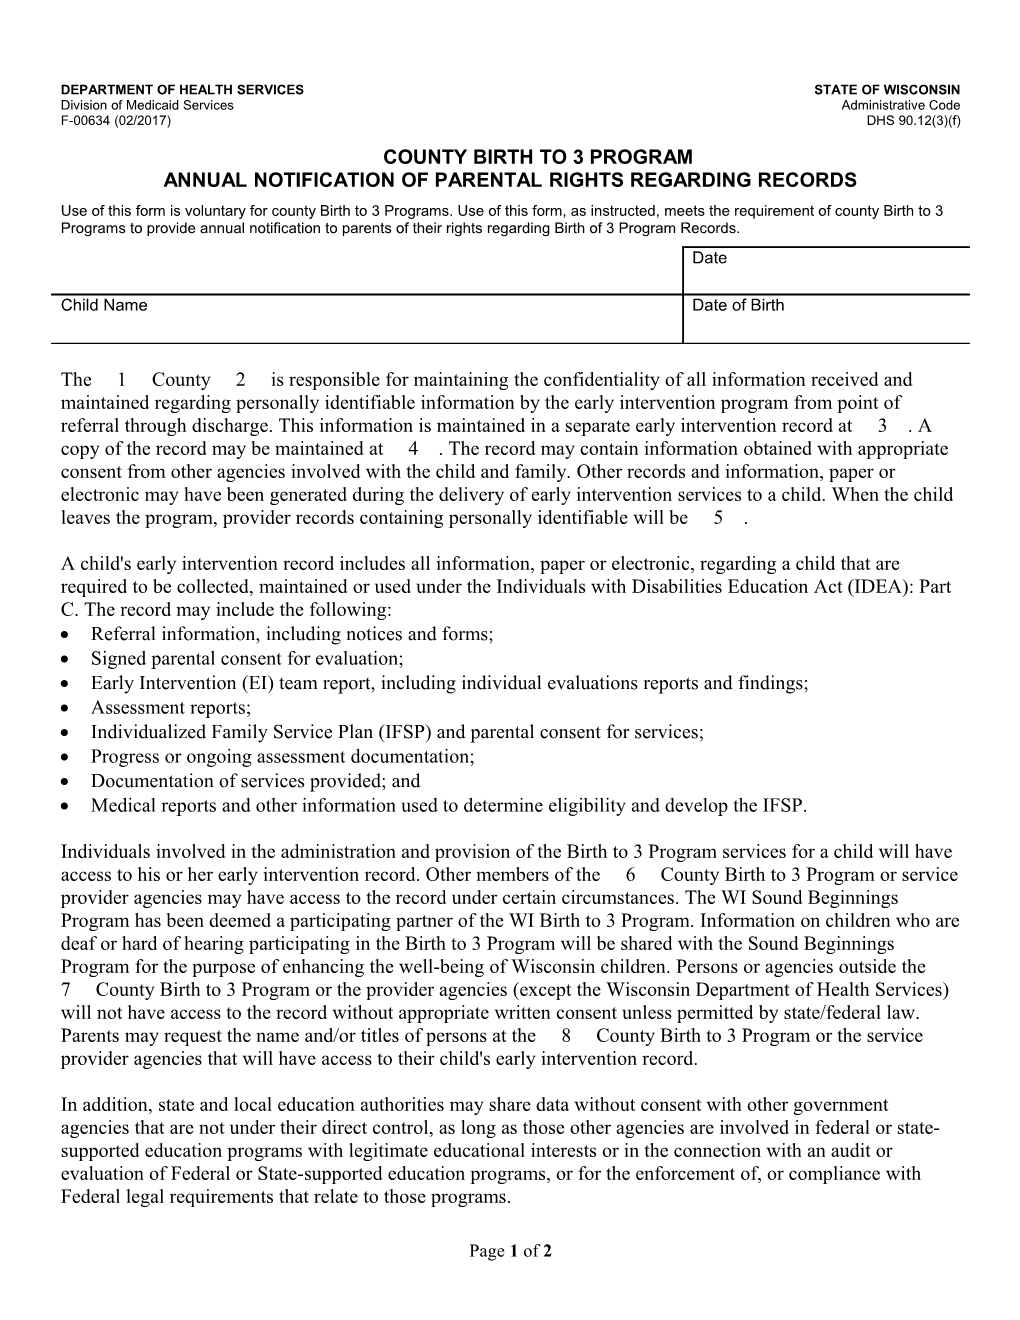 County Birth to 3 Program Annual Notification of Parental Rights Regarding Records